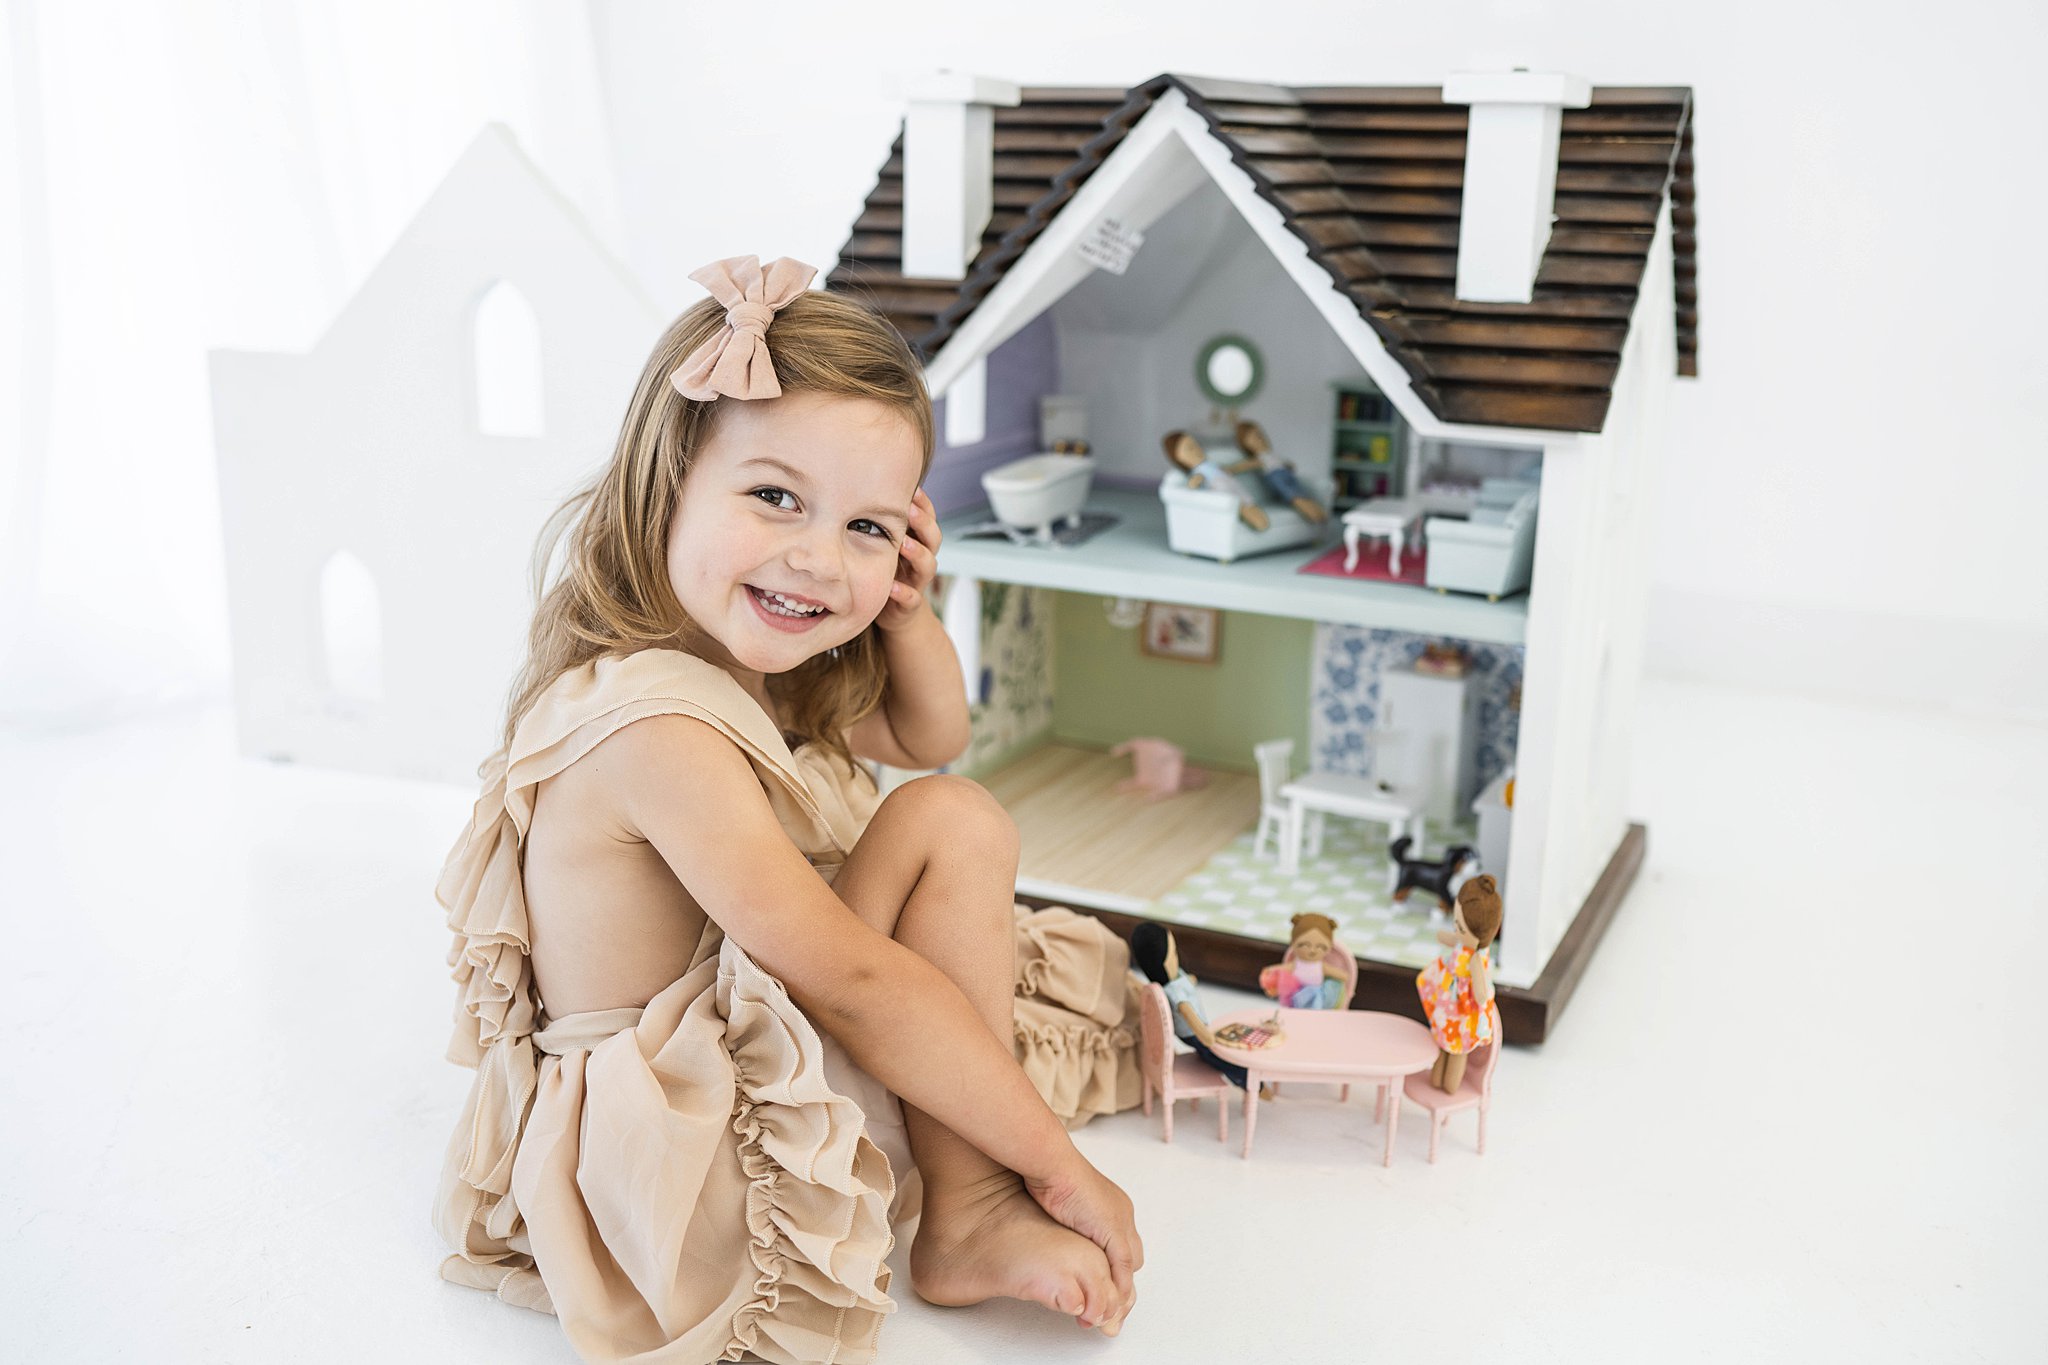 A young girl in a beige dress sets up a dinner table for a playhouse in a studio oklahoma city toy stores